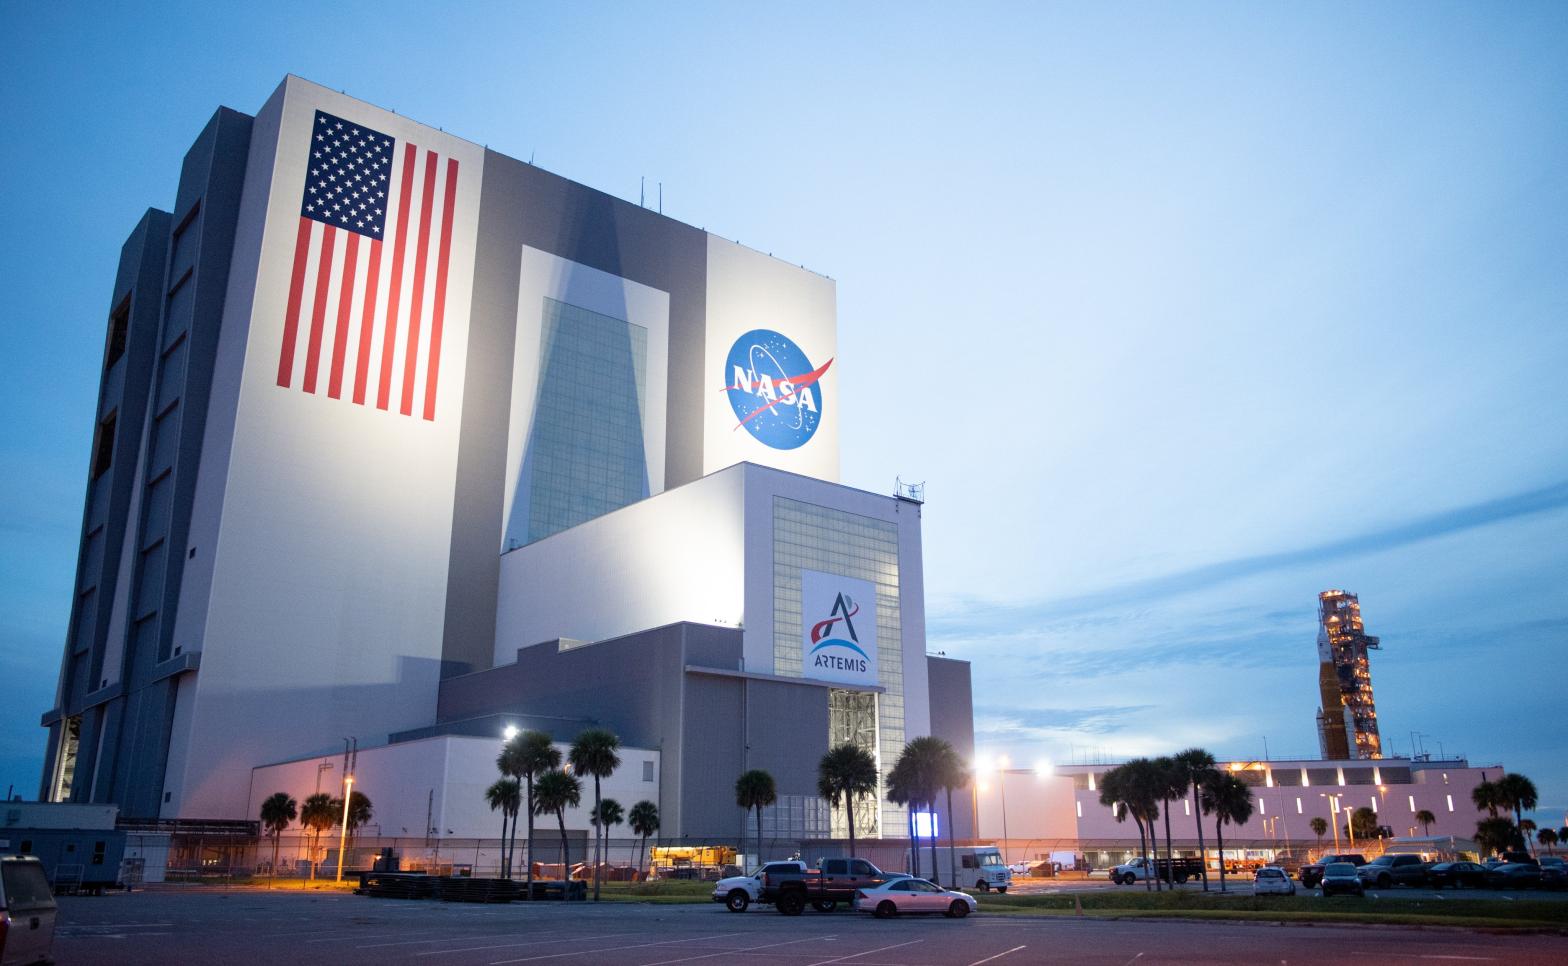 The SLS rocket (far right) arriving at the Vehicle Assembly Building on the morning of Tuesday, September 27. (Photo: NASA)